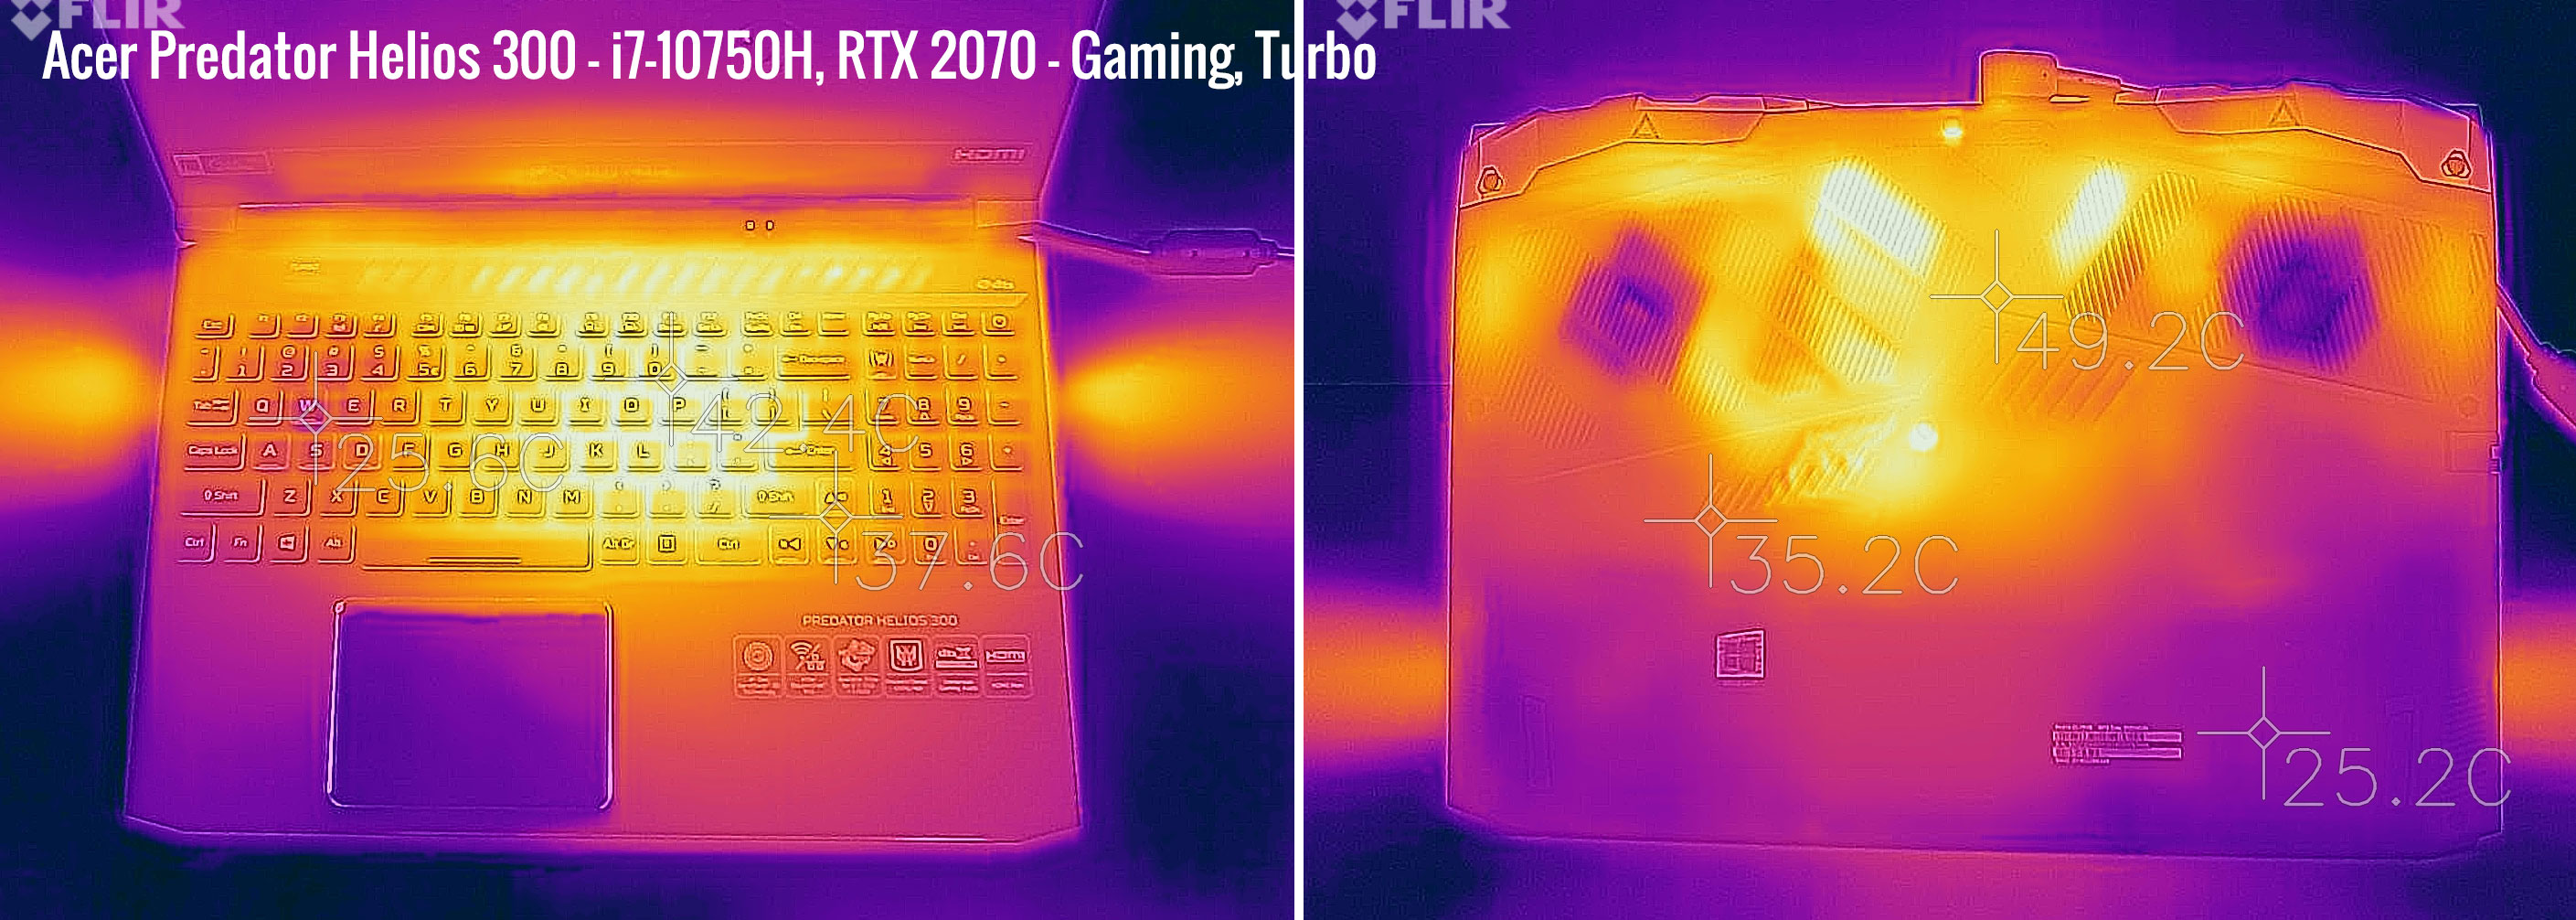 tempeartures helios300 gaming turbo